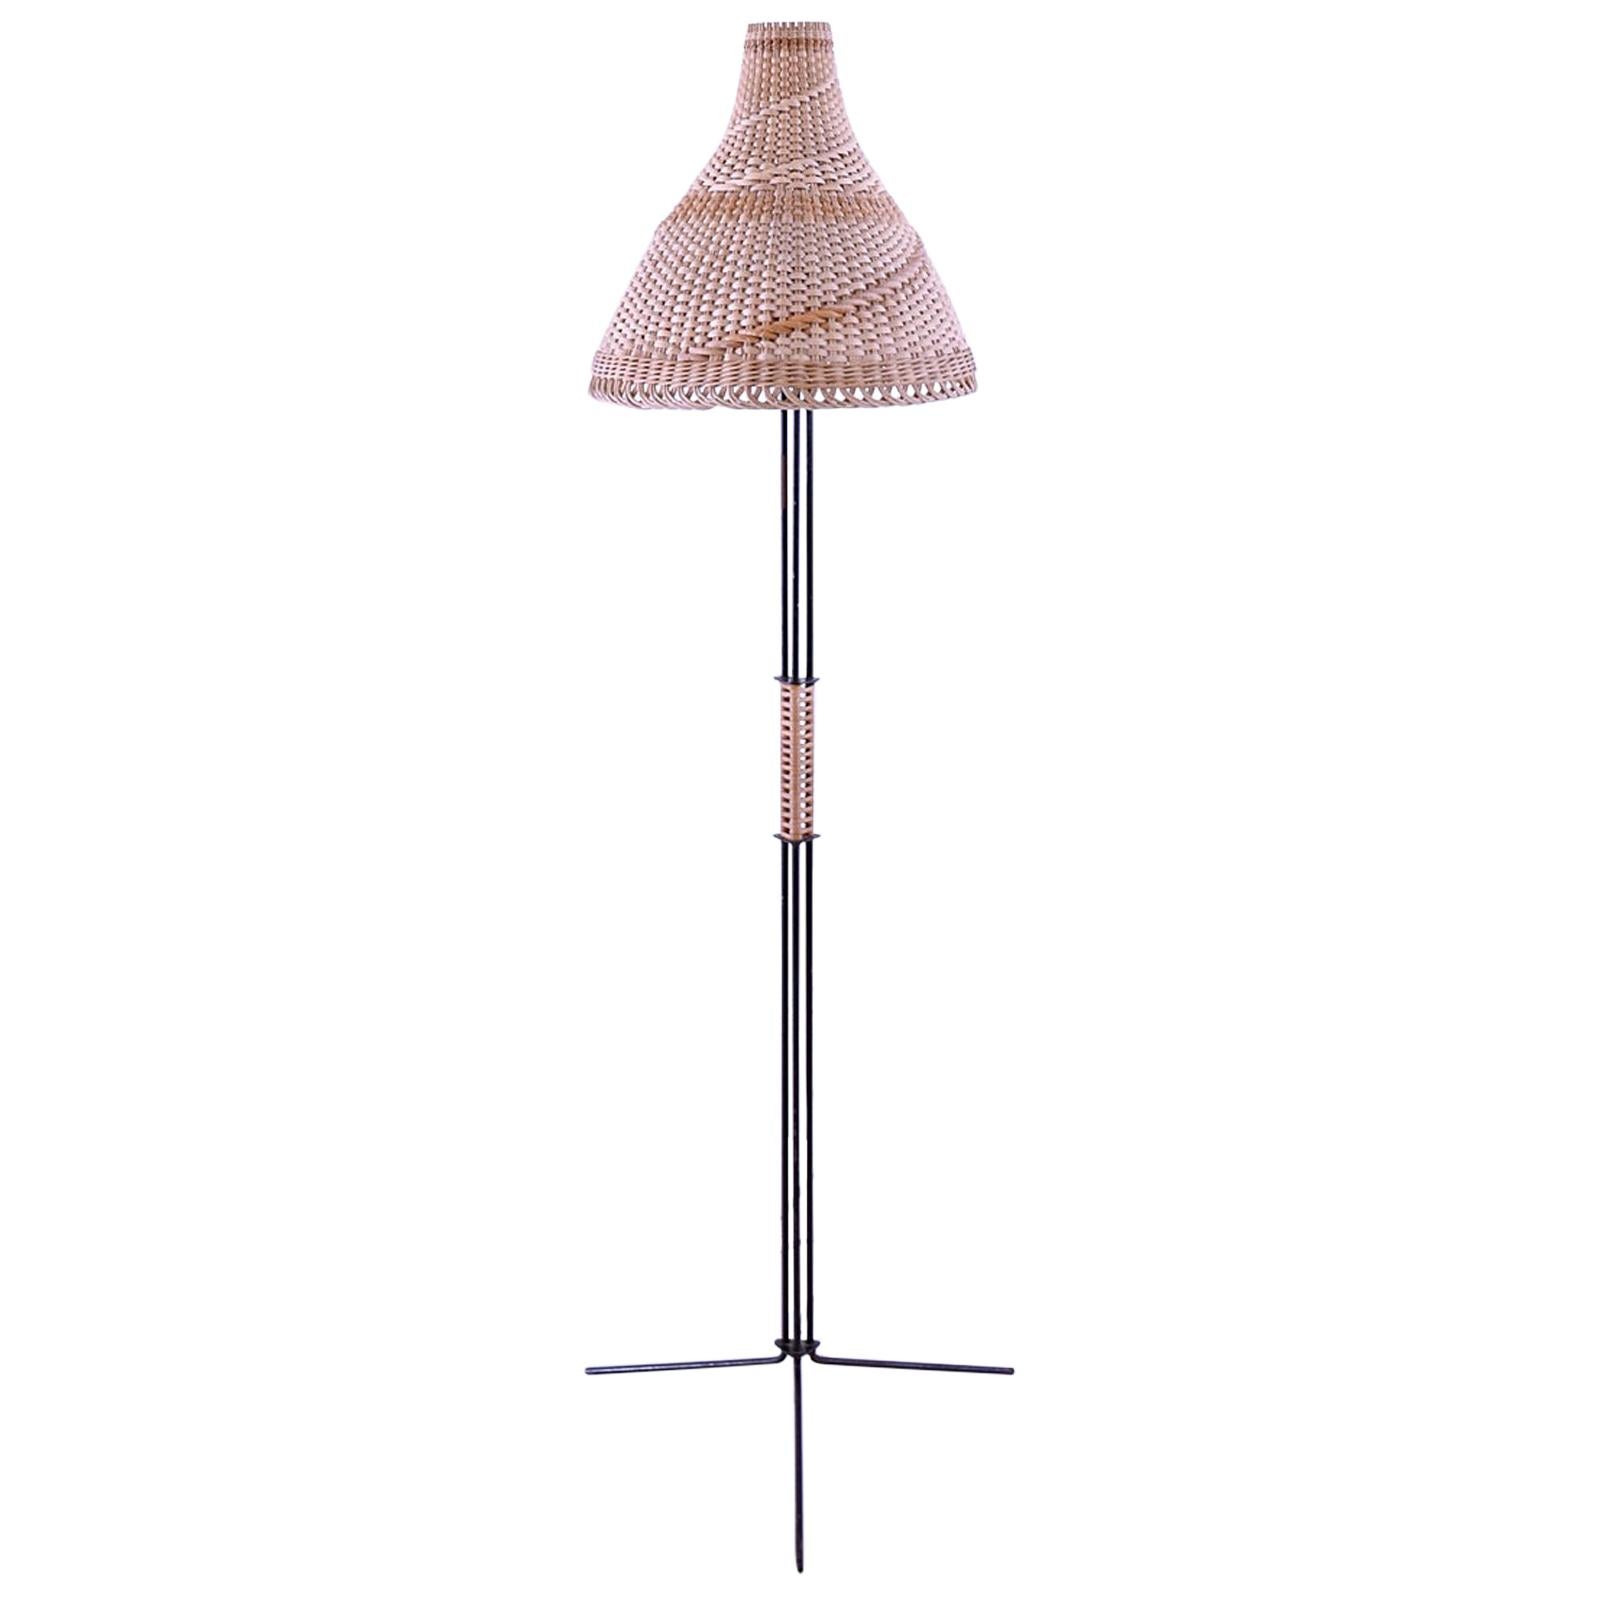 Unique  Modernist Iron and Wicker Floor Lamp, Hungary, 1950s